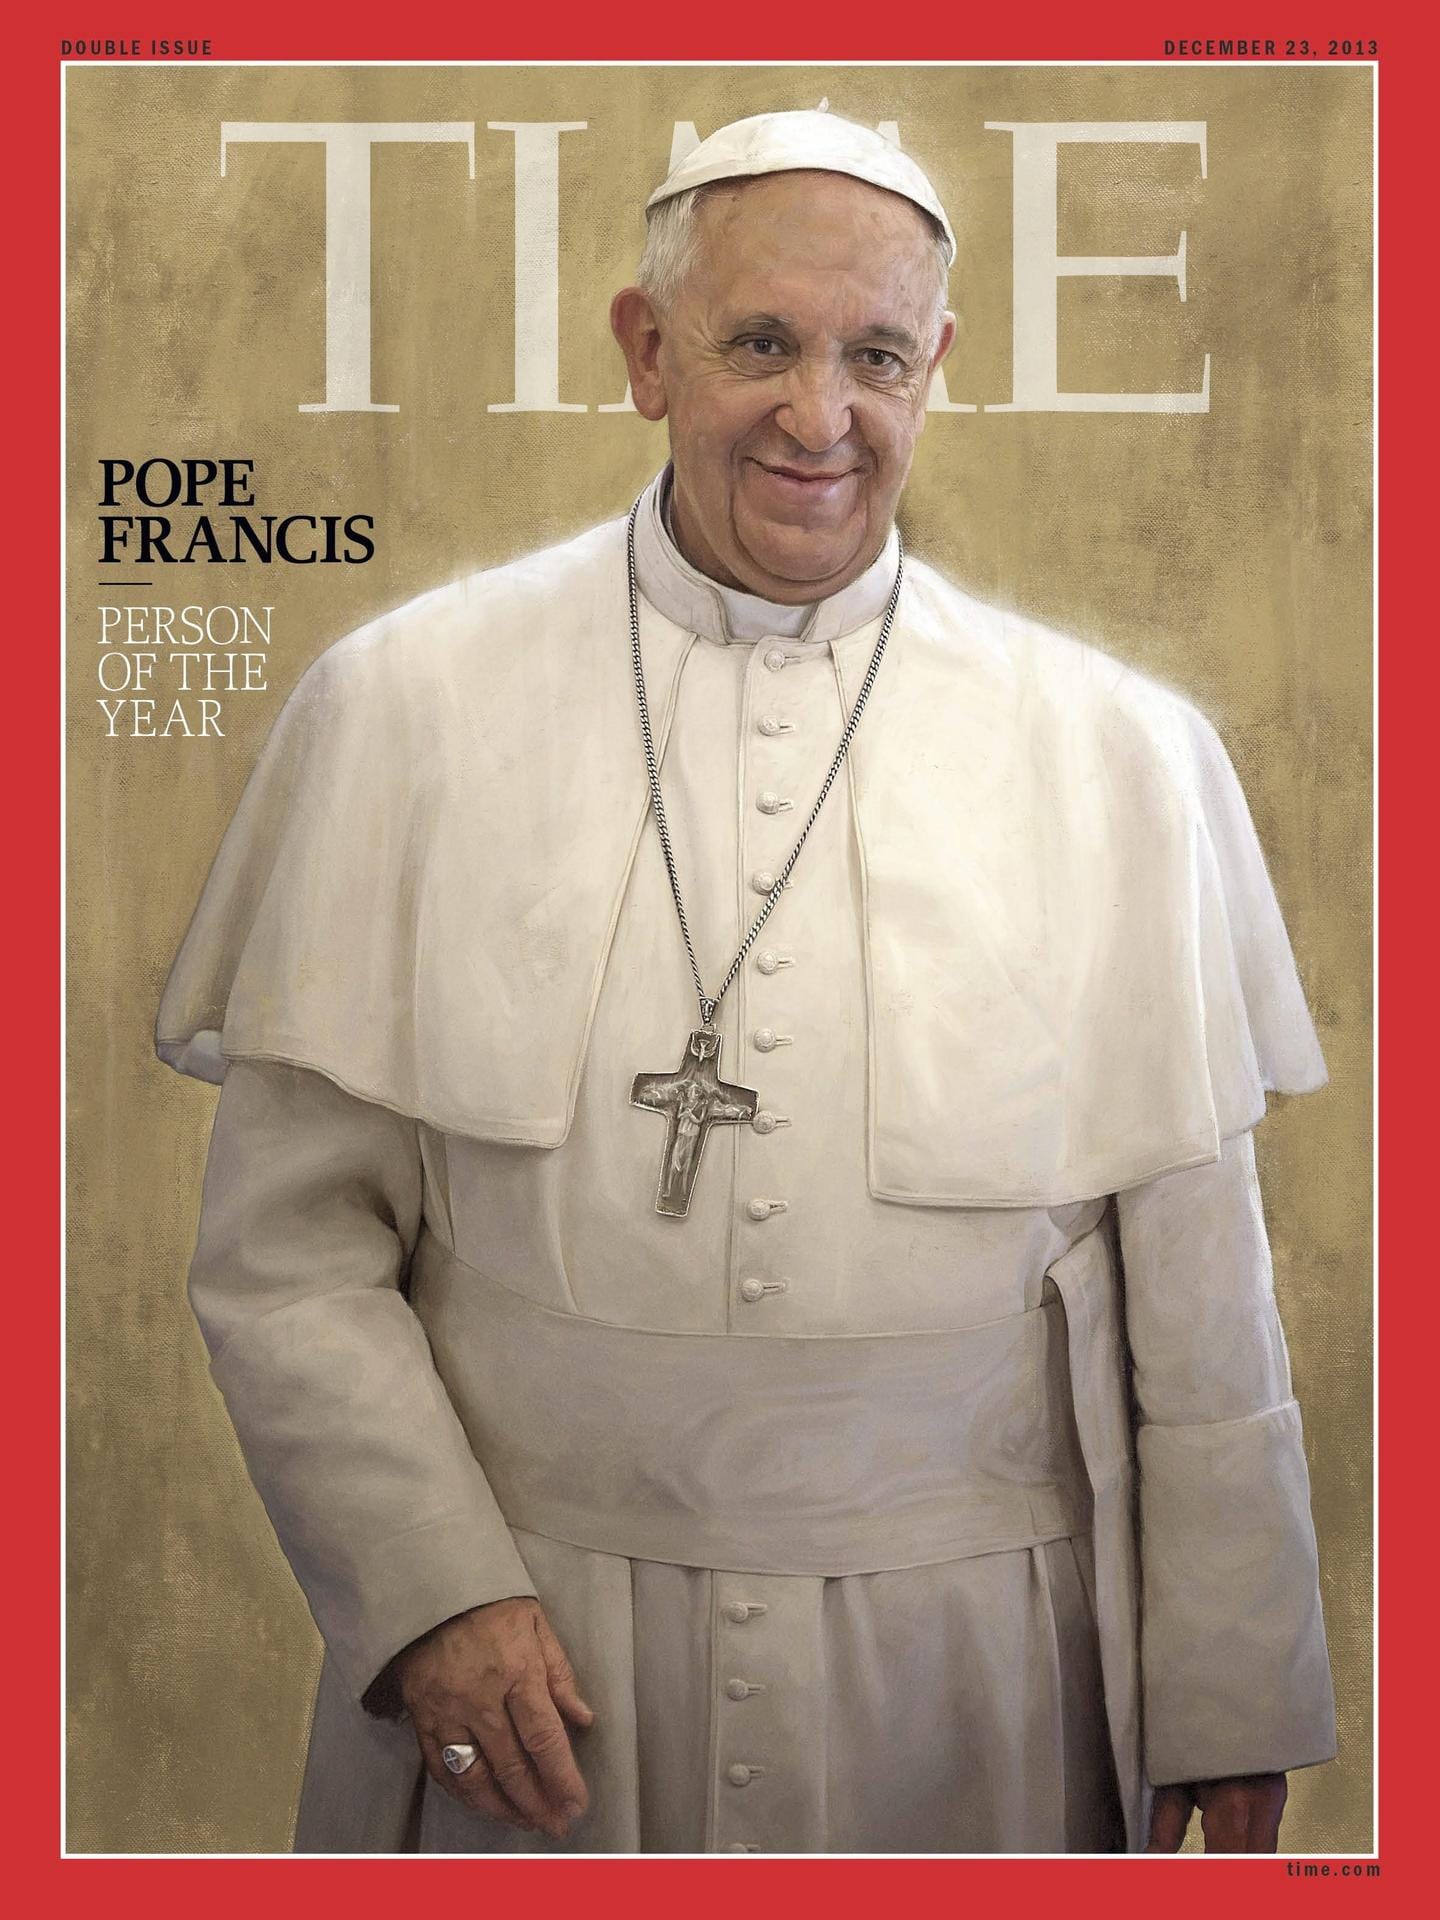 Papst Franziskus: "Time" Person of the Year 2013